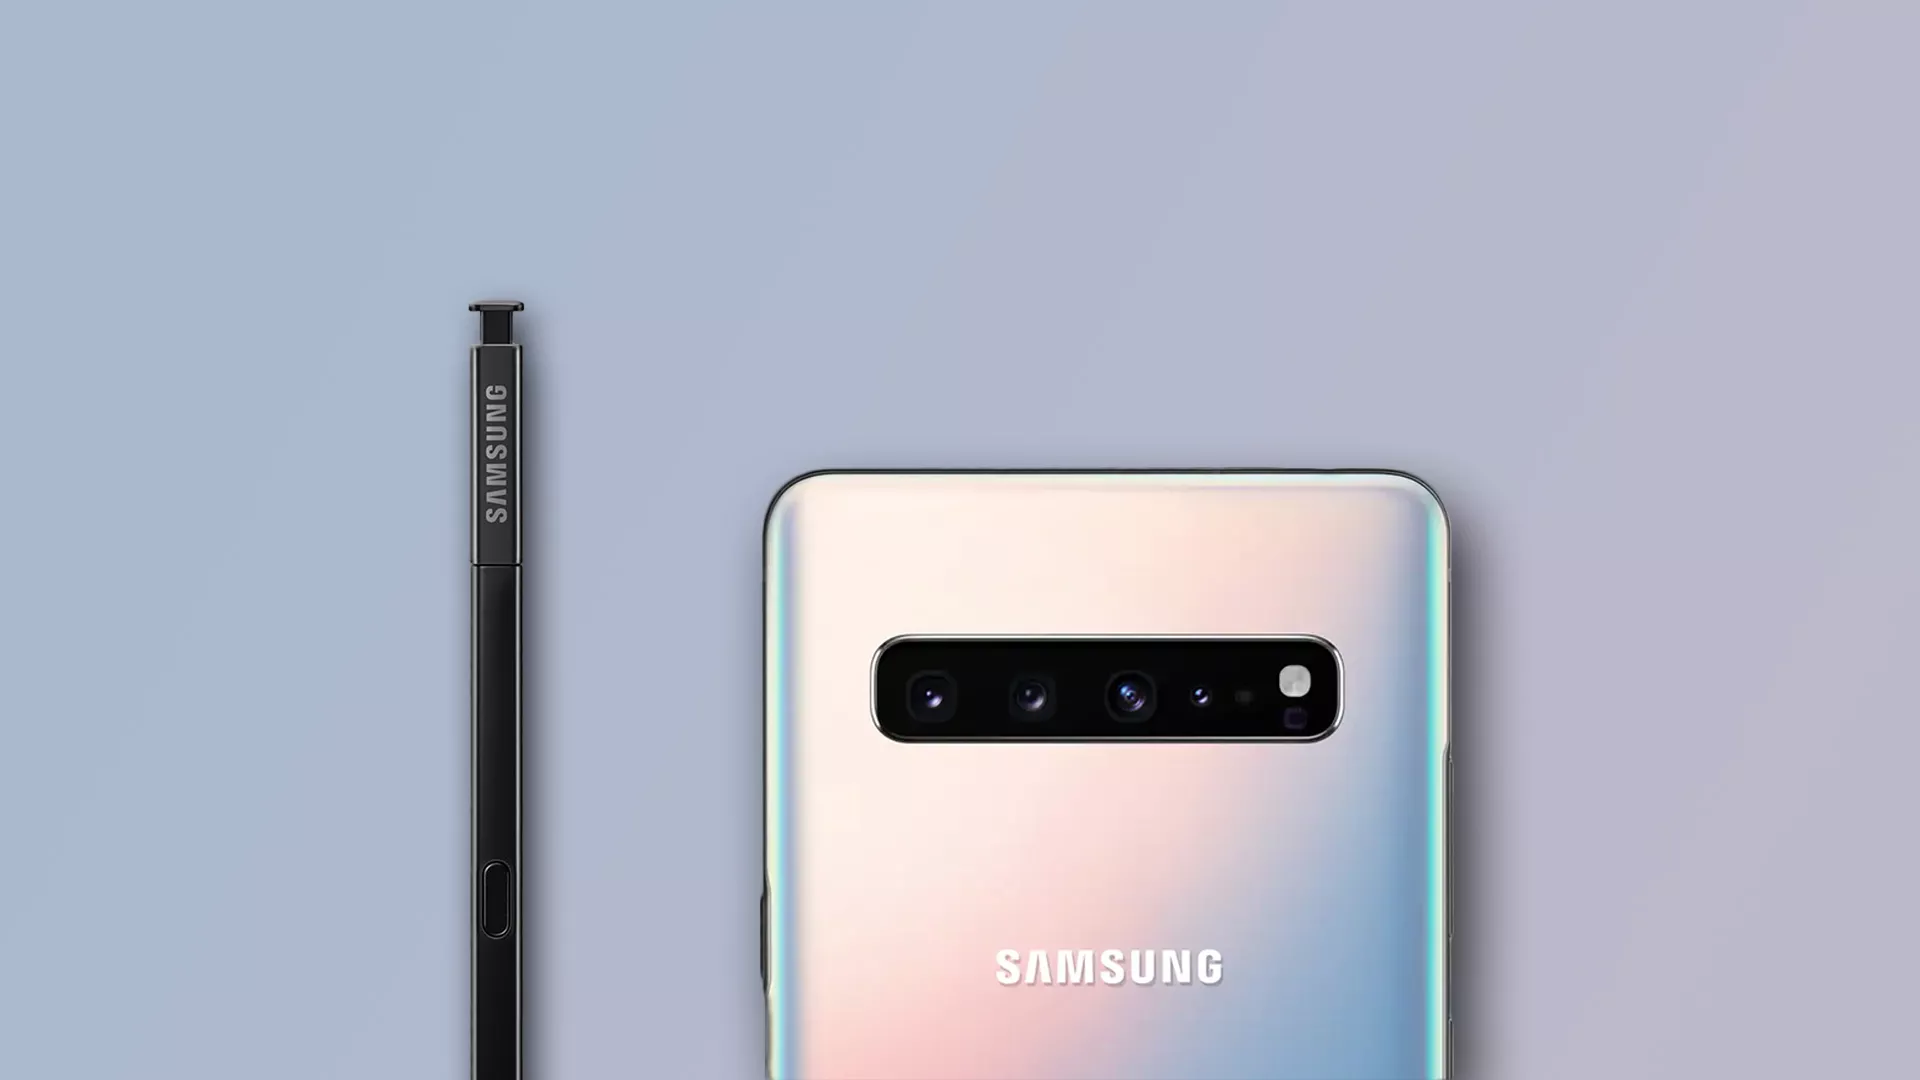 Samsung Galaxy Note 10: release date, price, expected features